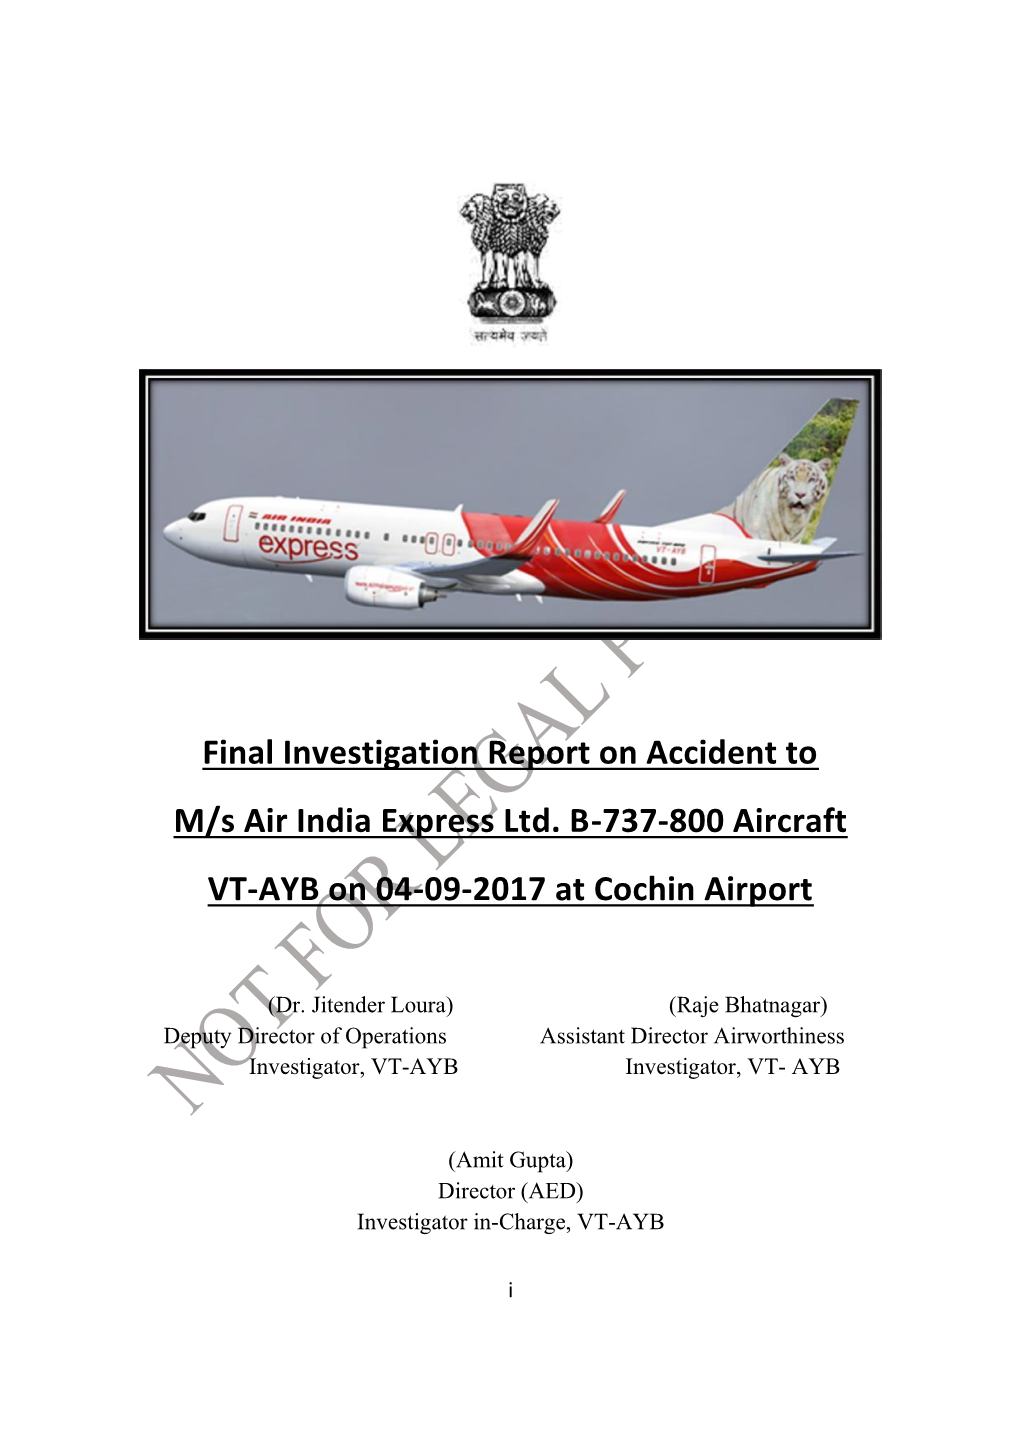 Final Investigation Report on Accident to M/S Air India Express Ltd. B-737-800 Aircraft VT-AYB on 04-09-2017 at Cochin Airport